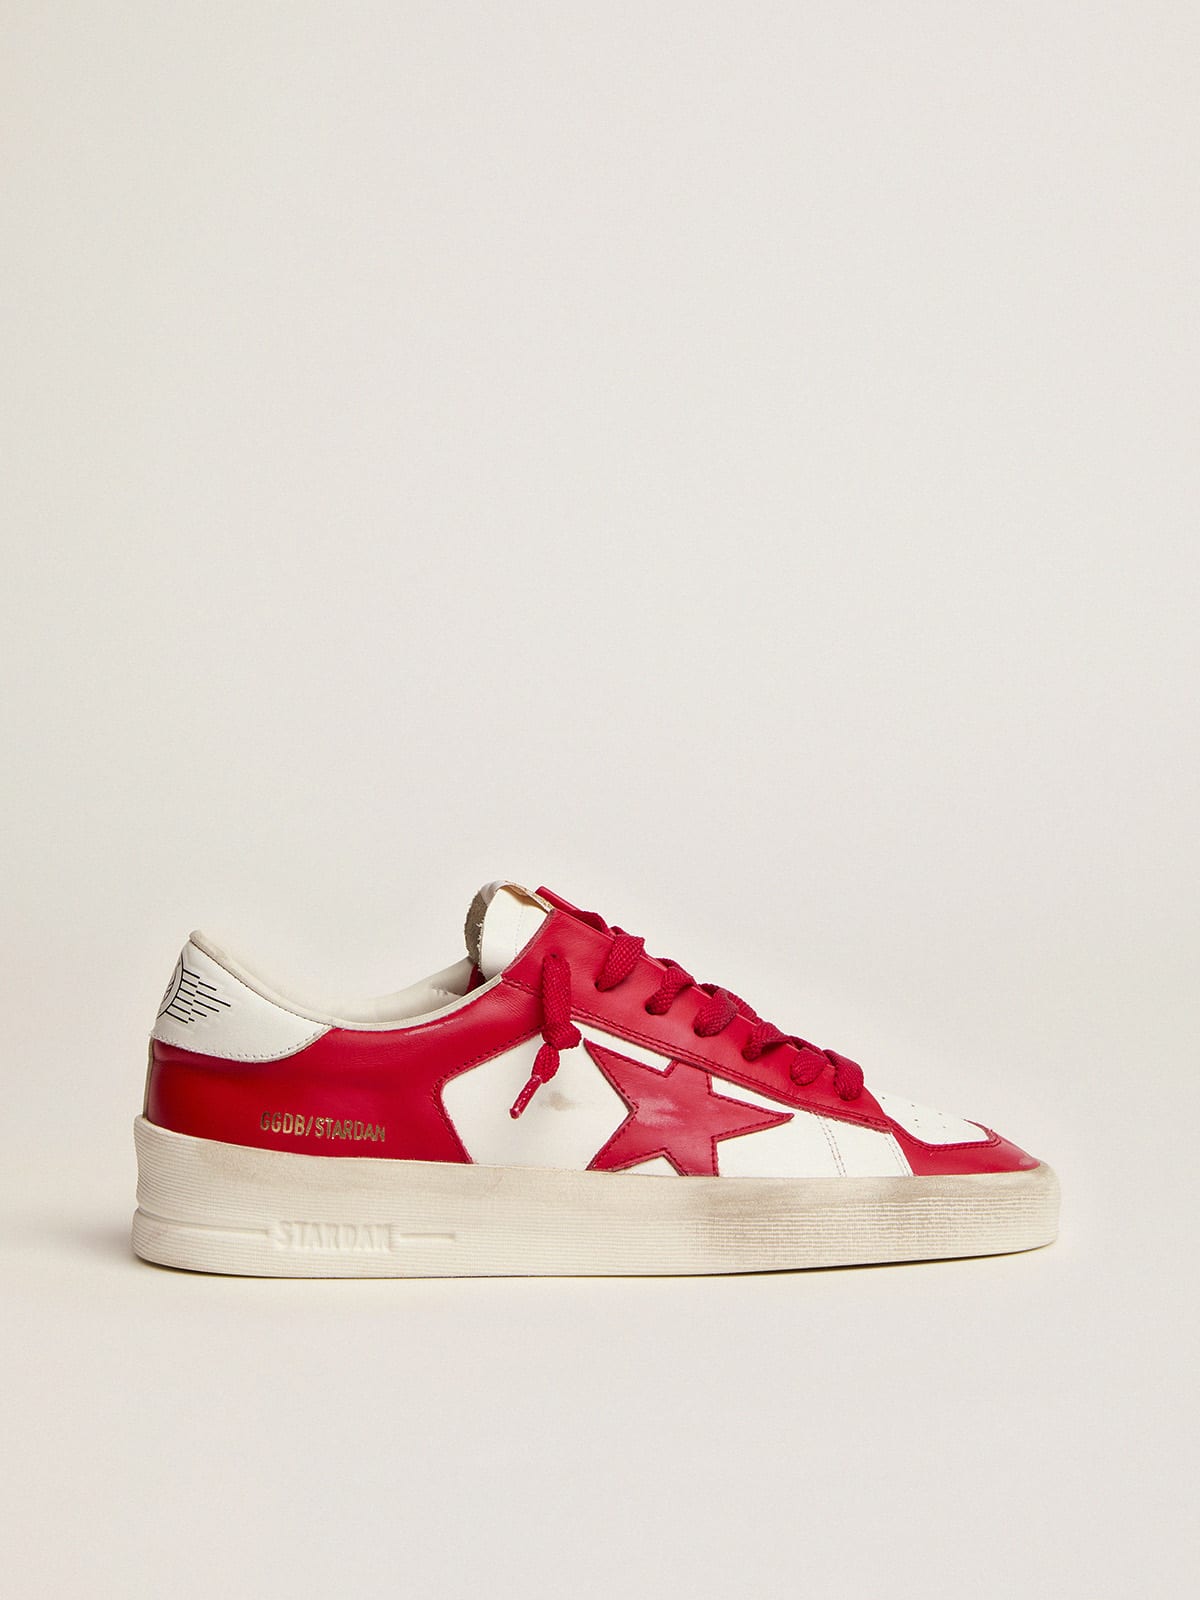 Golden Goose - Men's Stardan in white and red leather in 